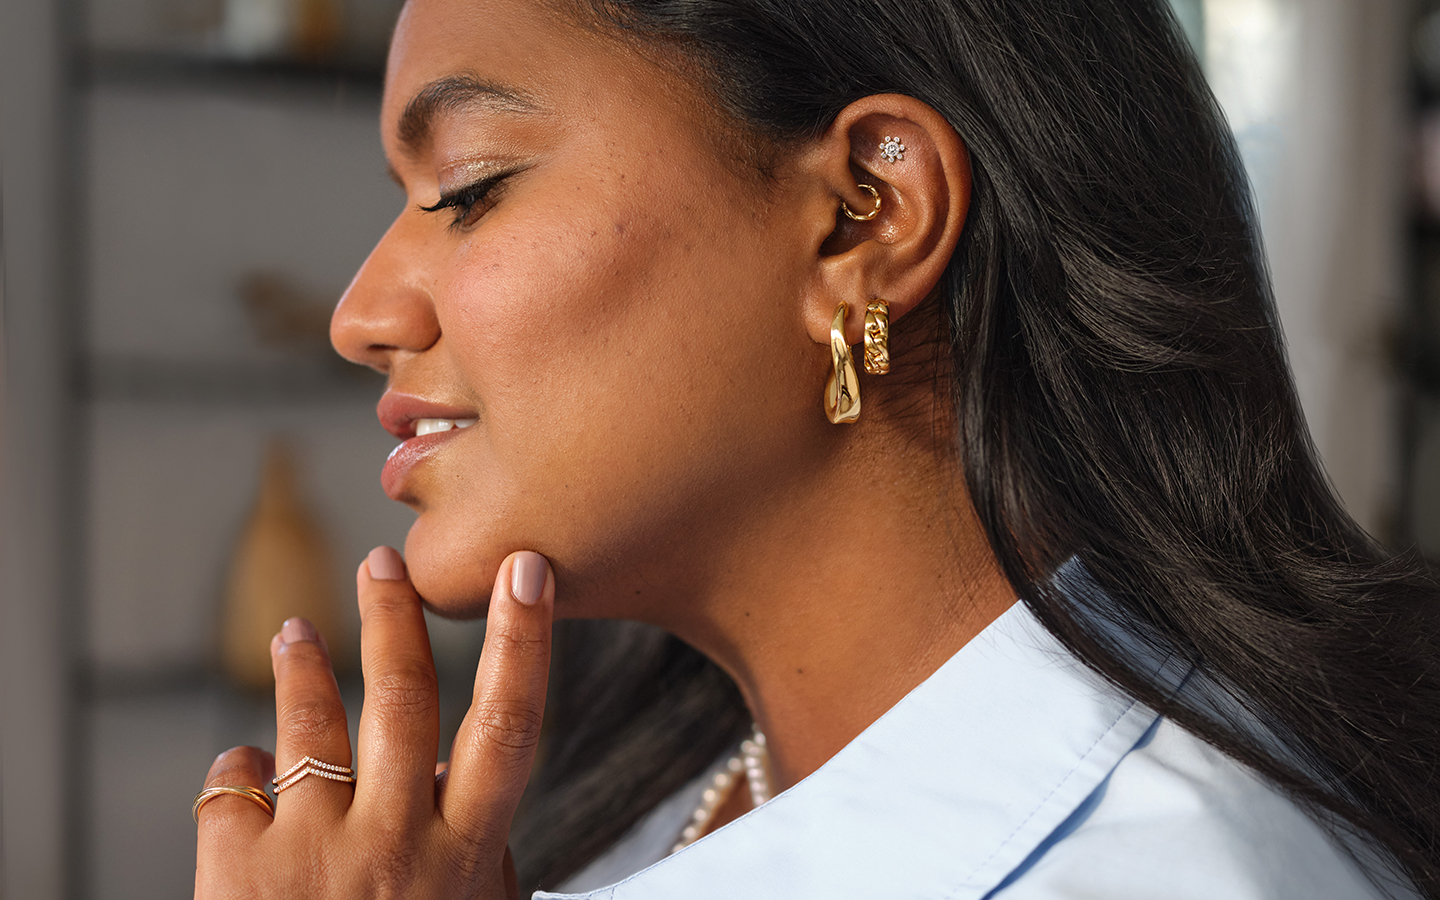 Profile of a smiling woman, she is wearing a maximalist jewelry style with multiple earrings, rings and necklaces.